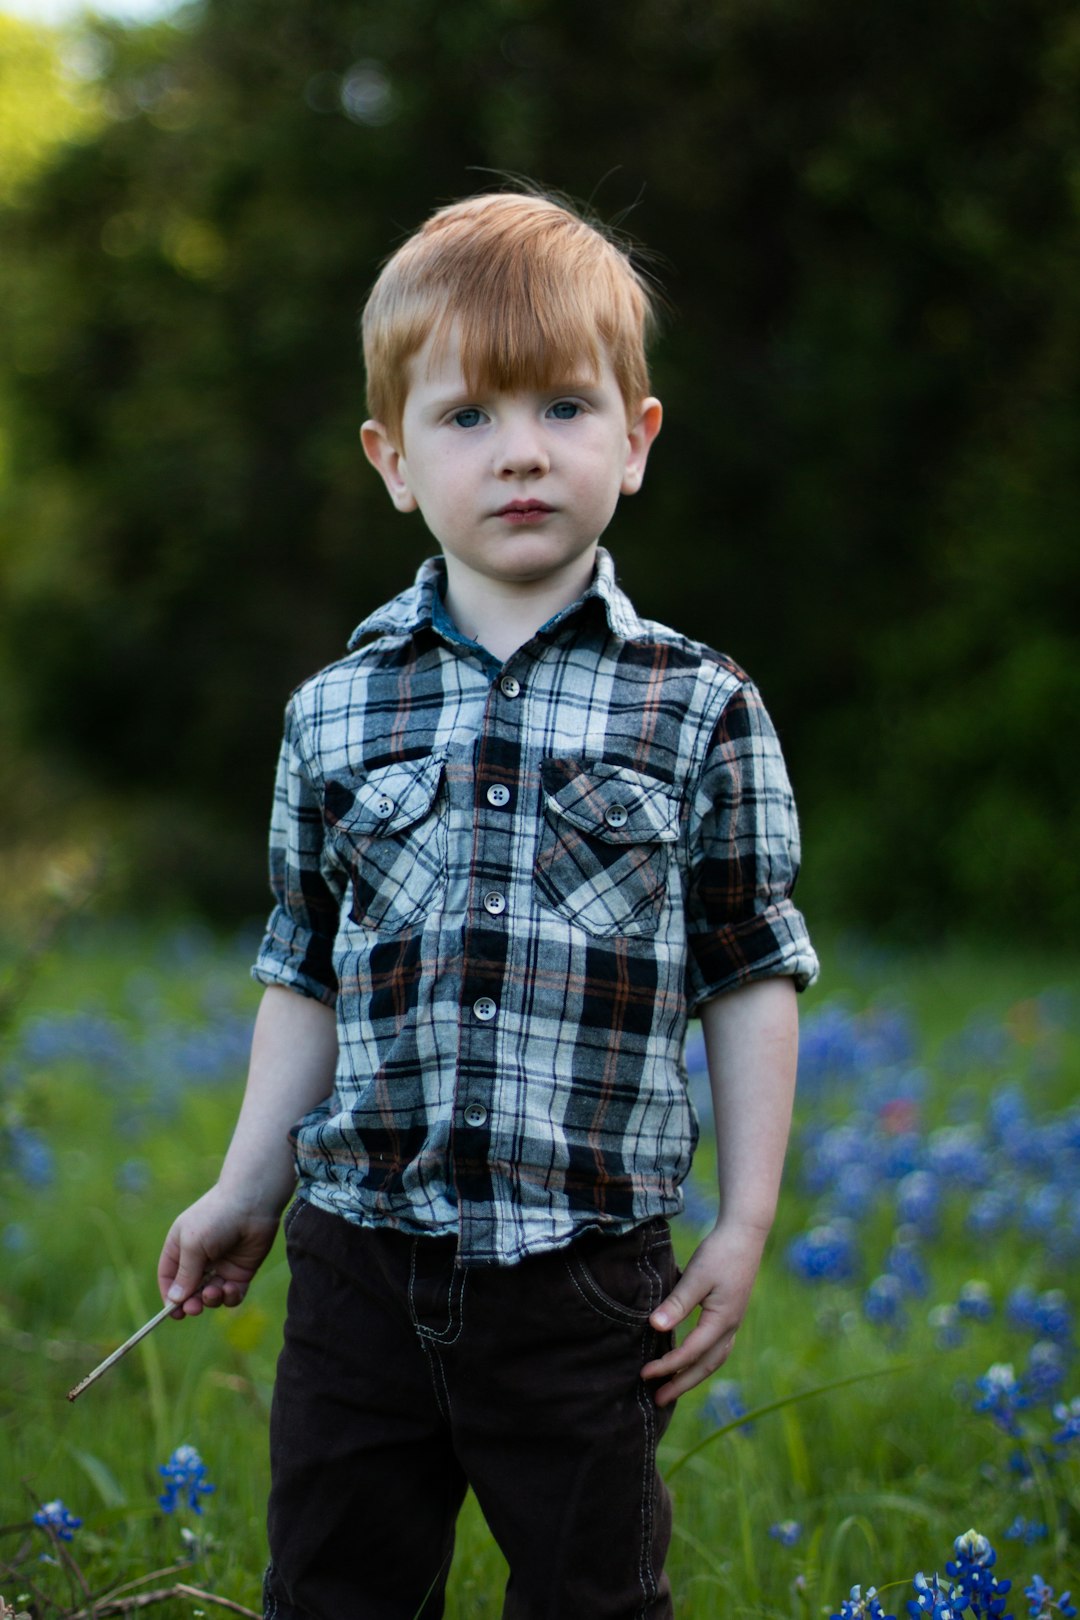 boy in blue and white plaid button up shirt standing on green grass field during daytime